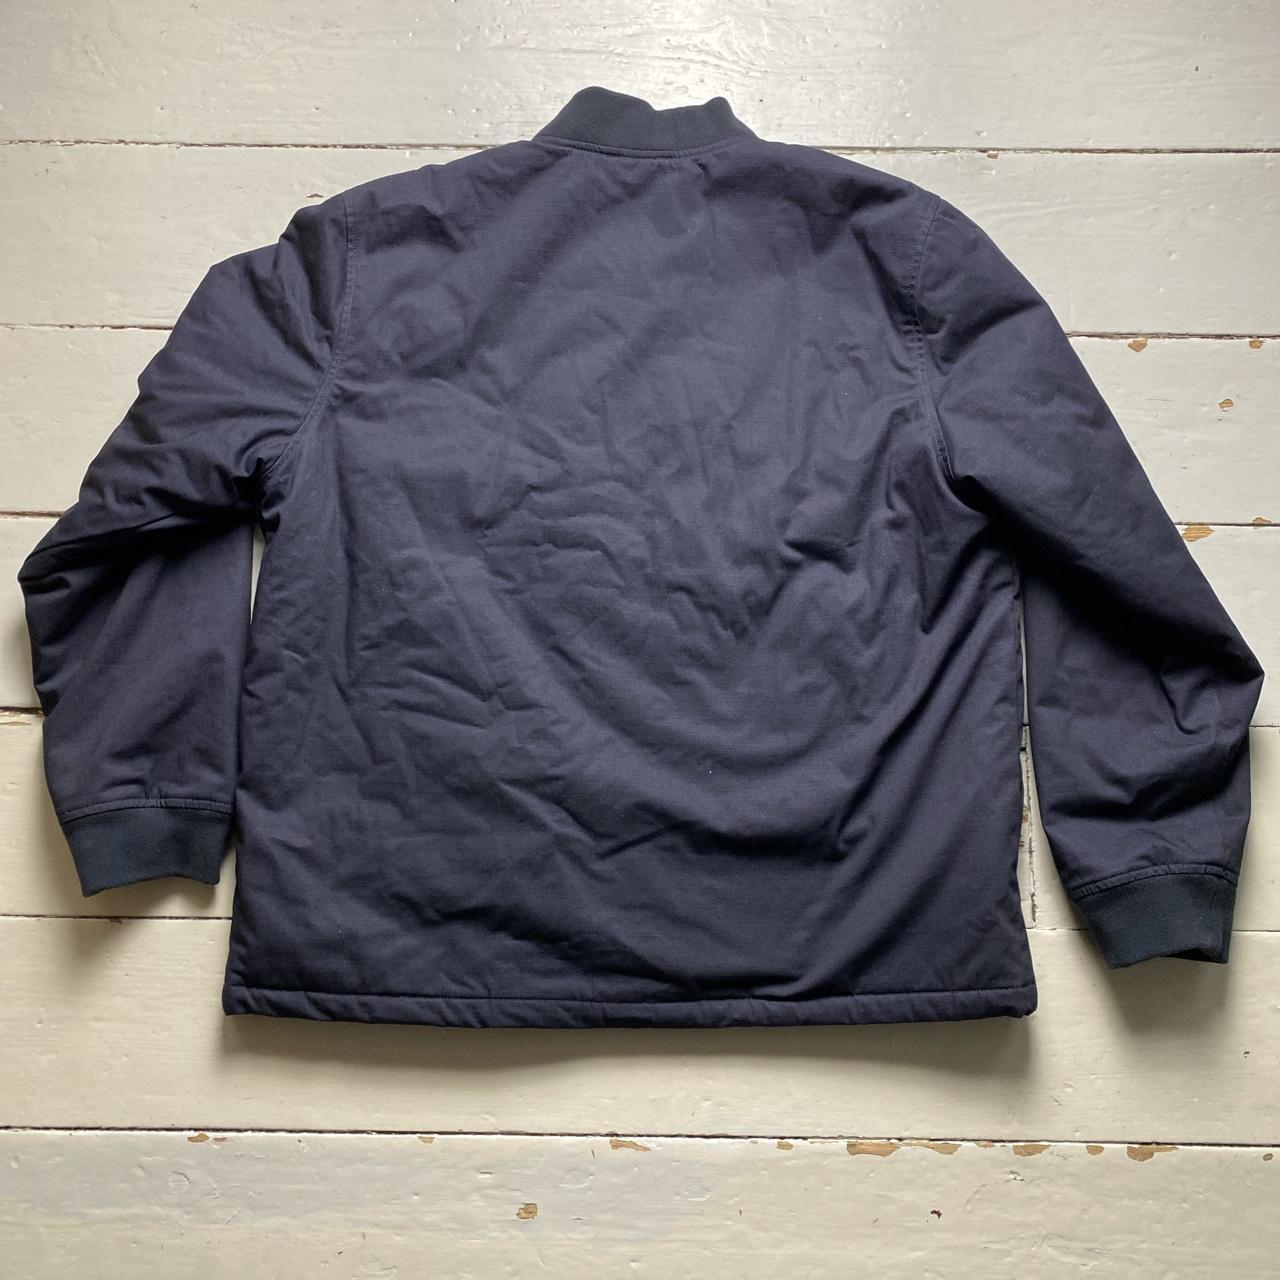 Levis Skateboarding Navy and Brown Sherpa Lining Bomber Jacket